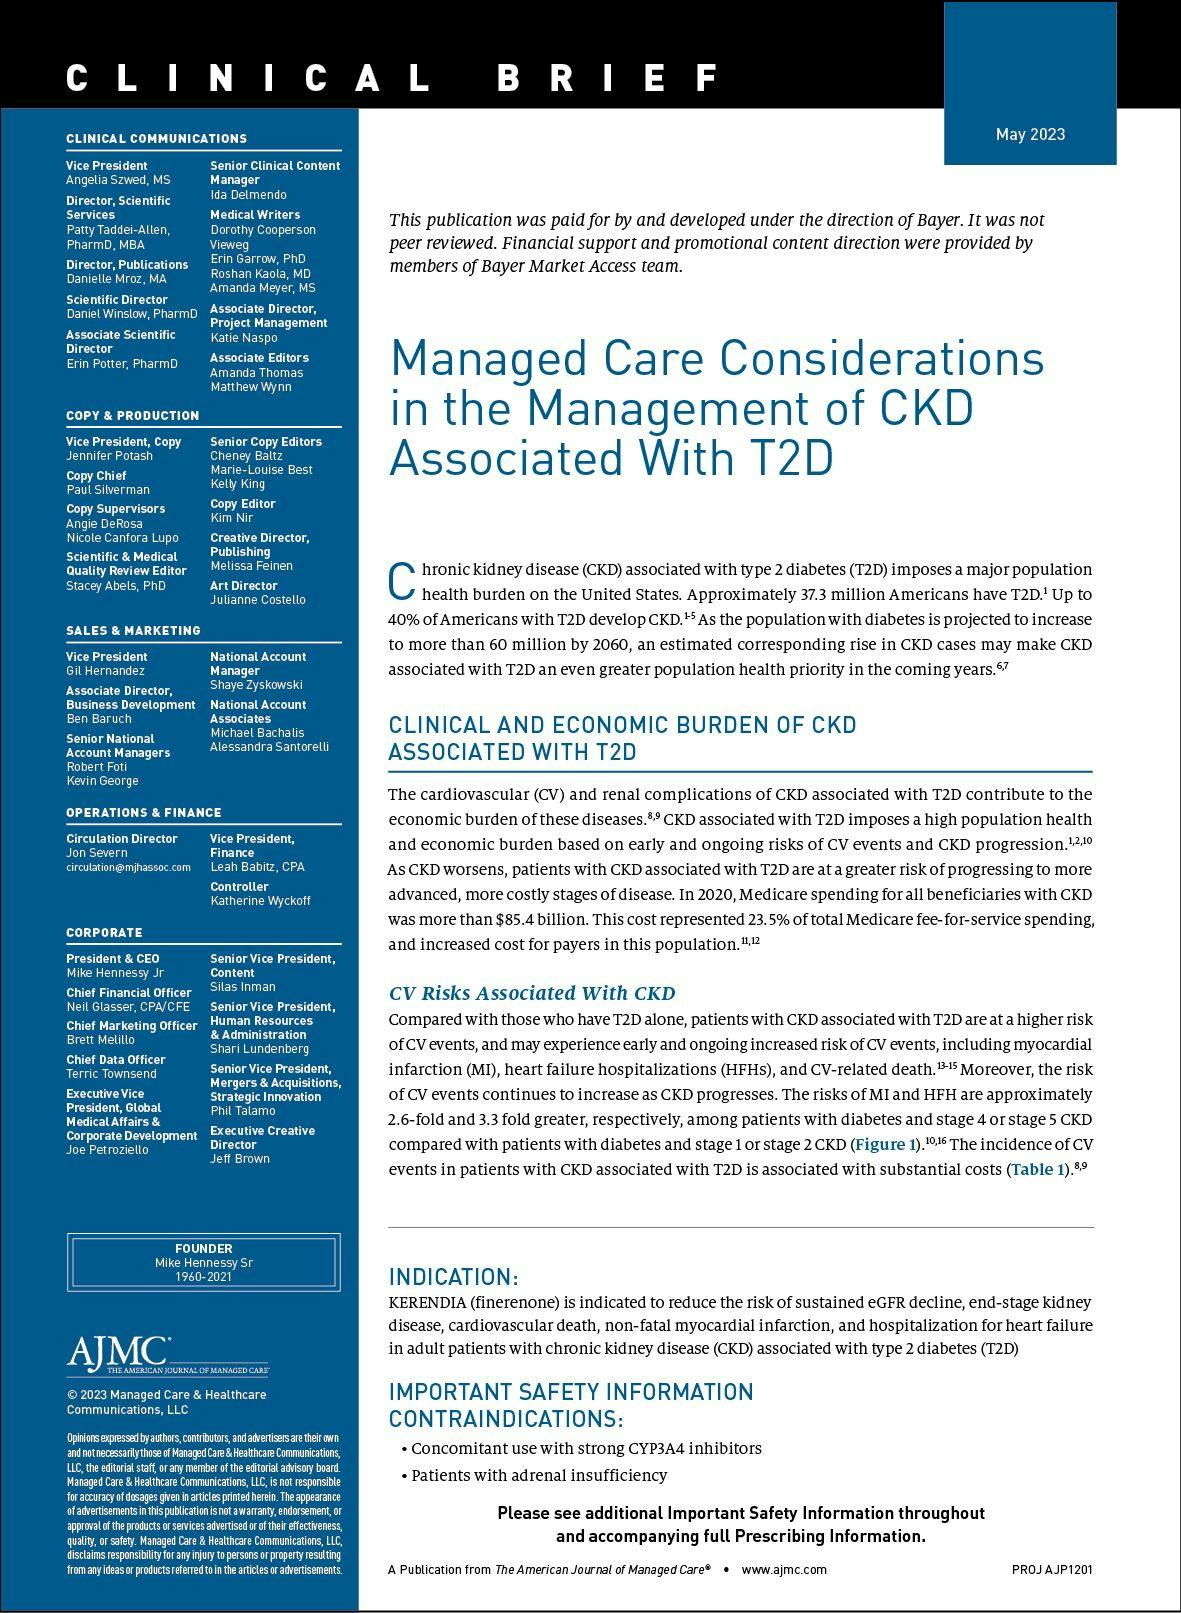 Managed Care Considerations in the Management of CKD Associated With T2D